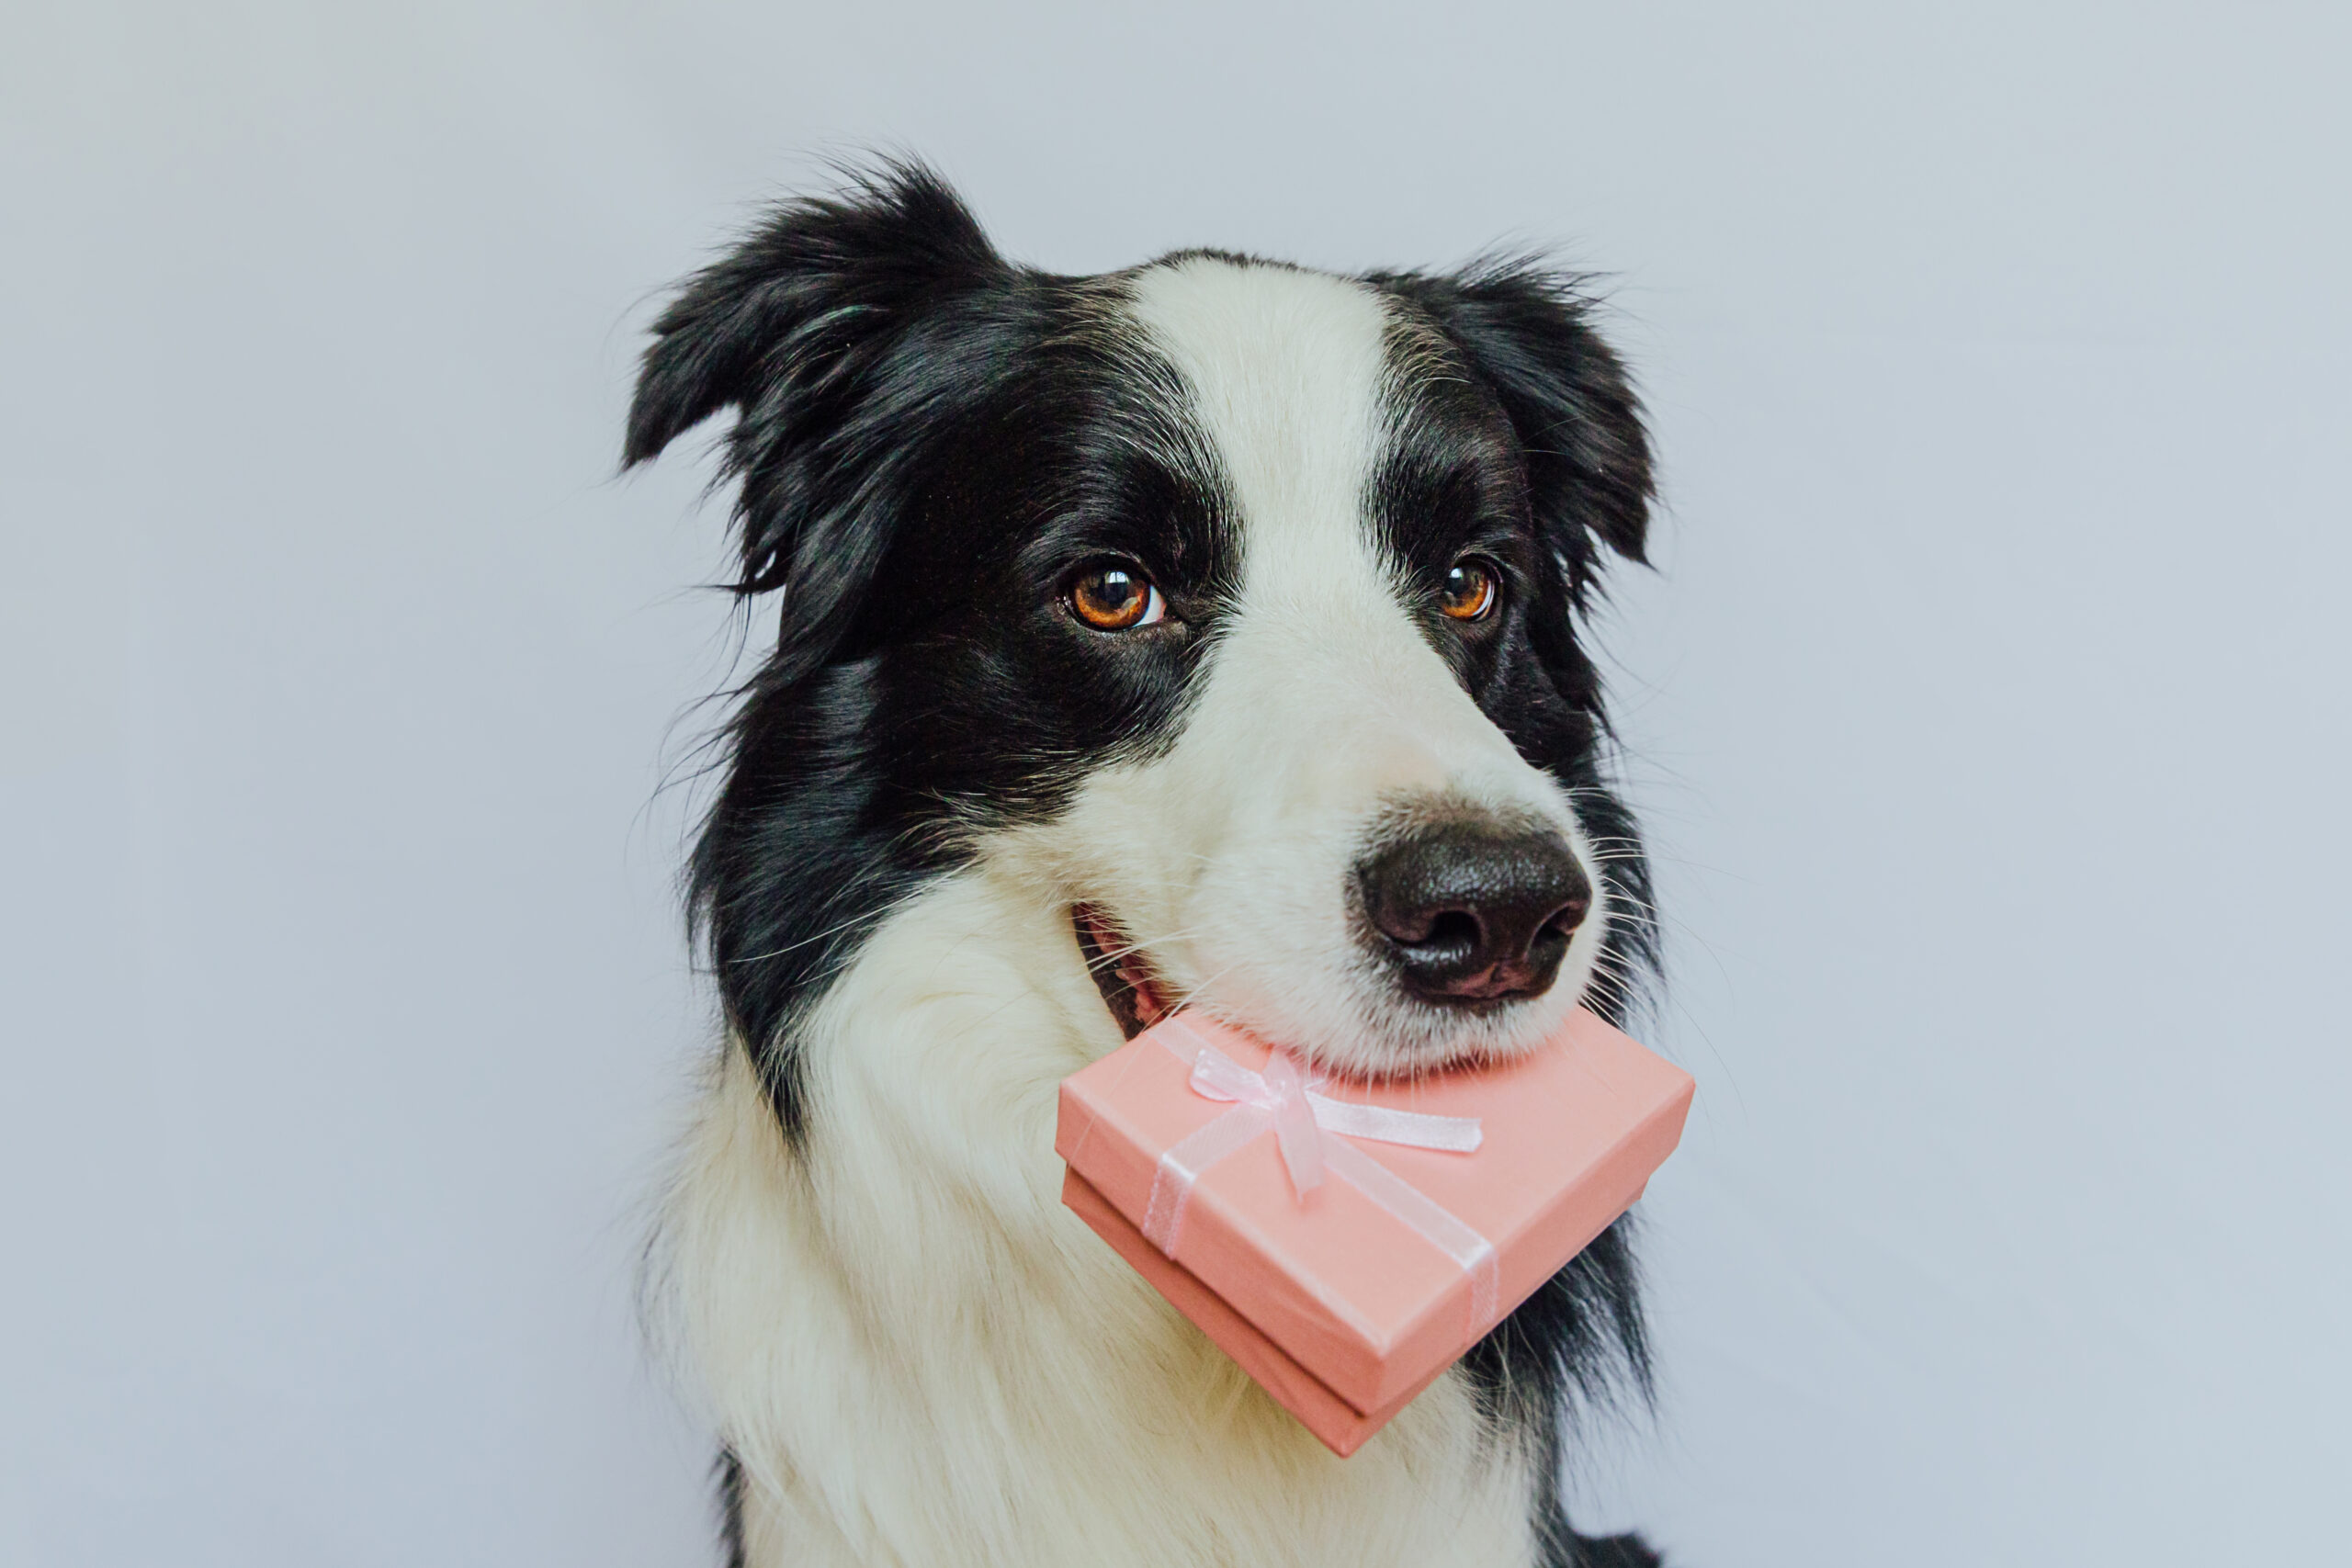 Puppy dog border collie holding pink gift box in mouth isolated on white background. Christmas New Year Birthday Valentine celebration present concept. Pet dog on holiday day gives gift. I'm sorry.